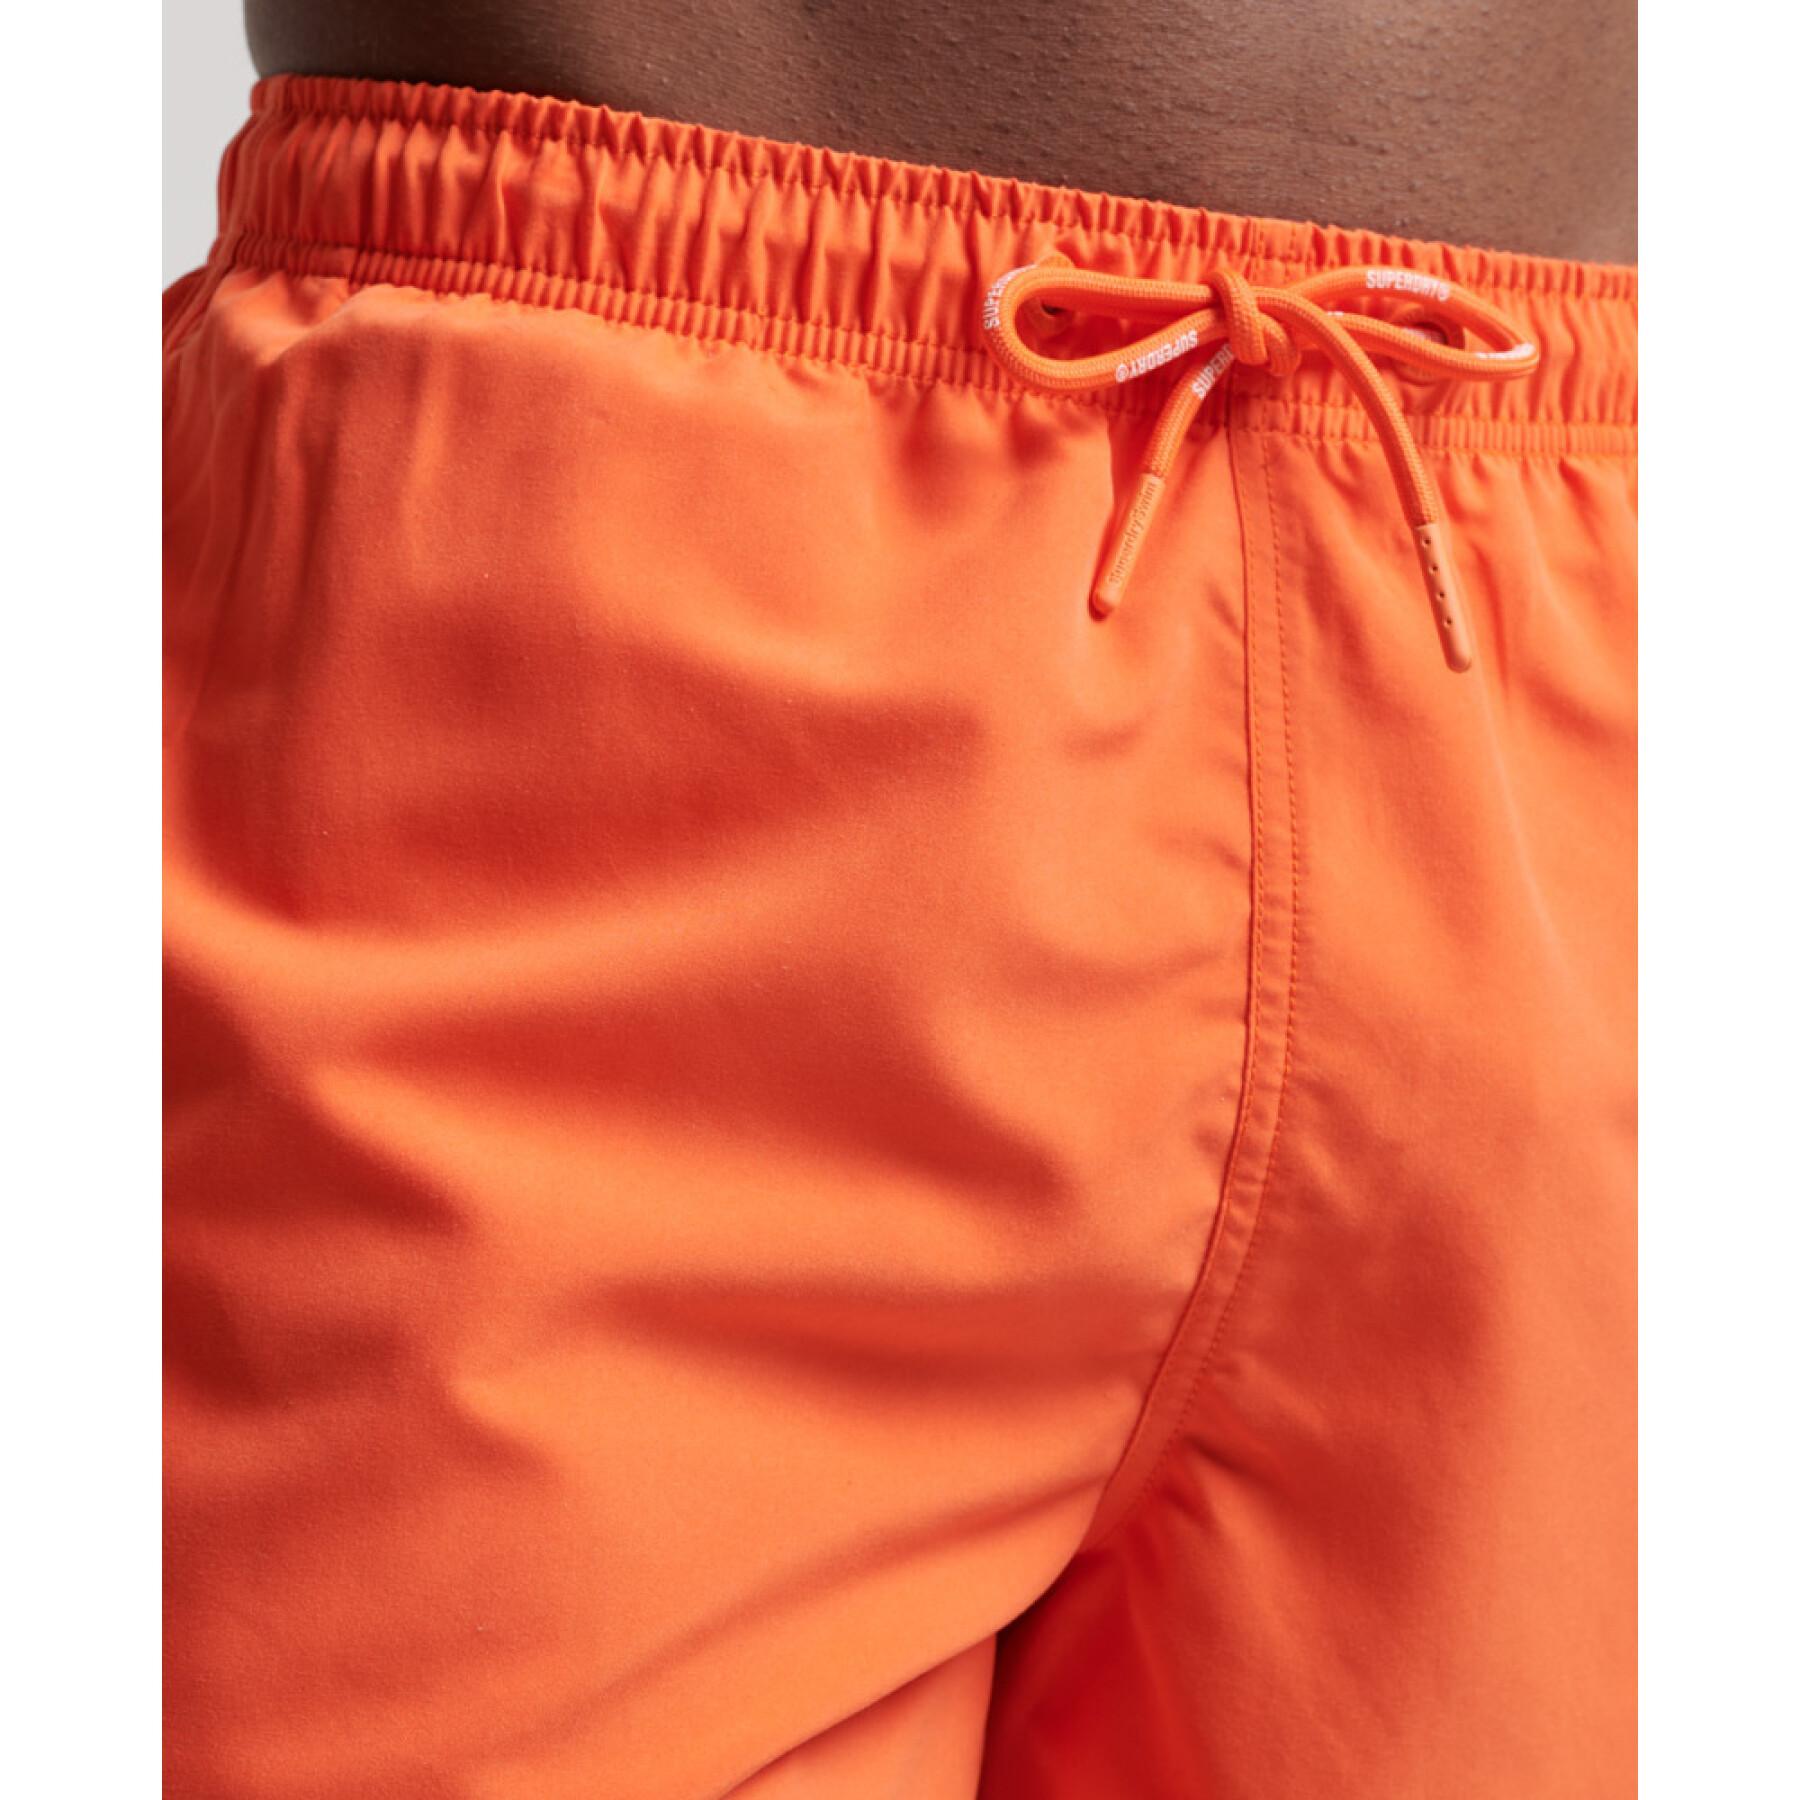 Swim shorts with applied pattern code Superdry